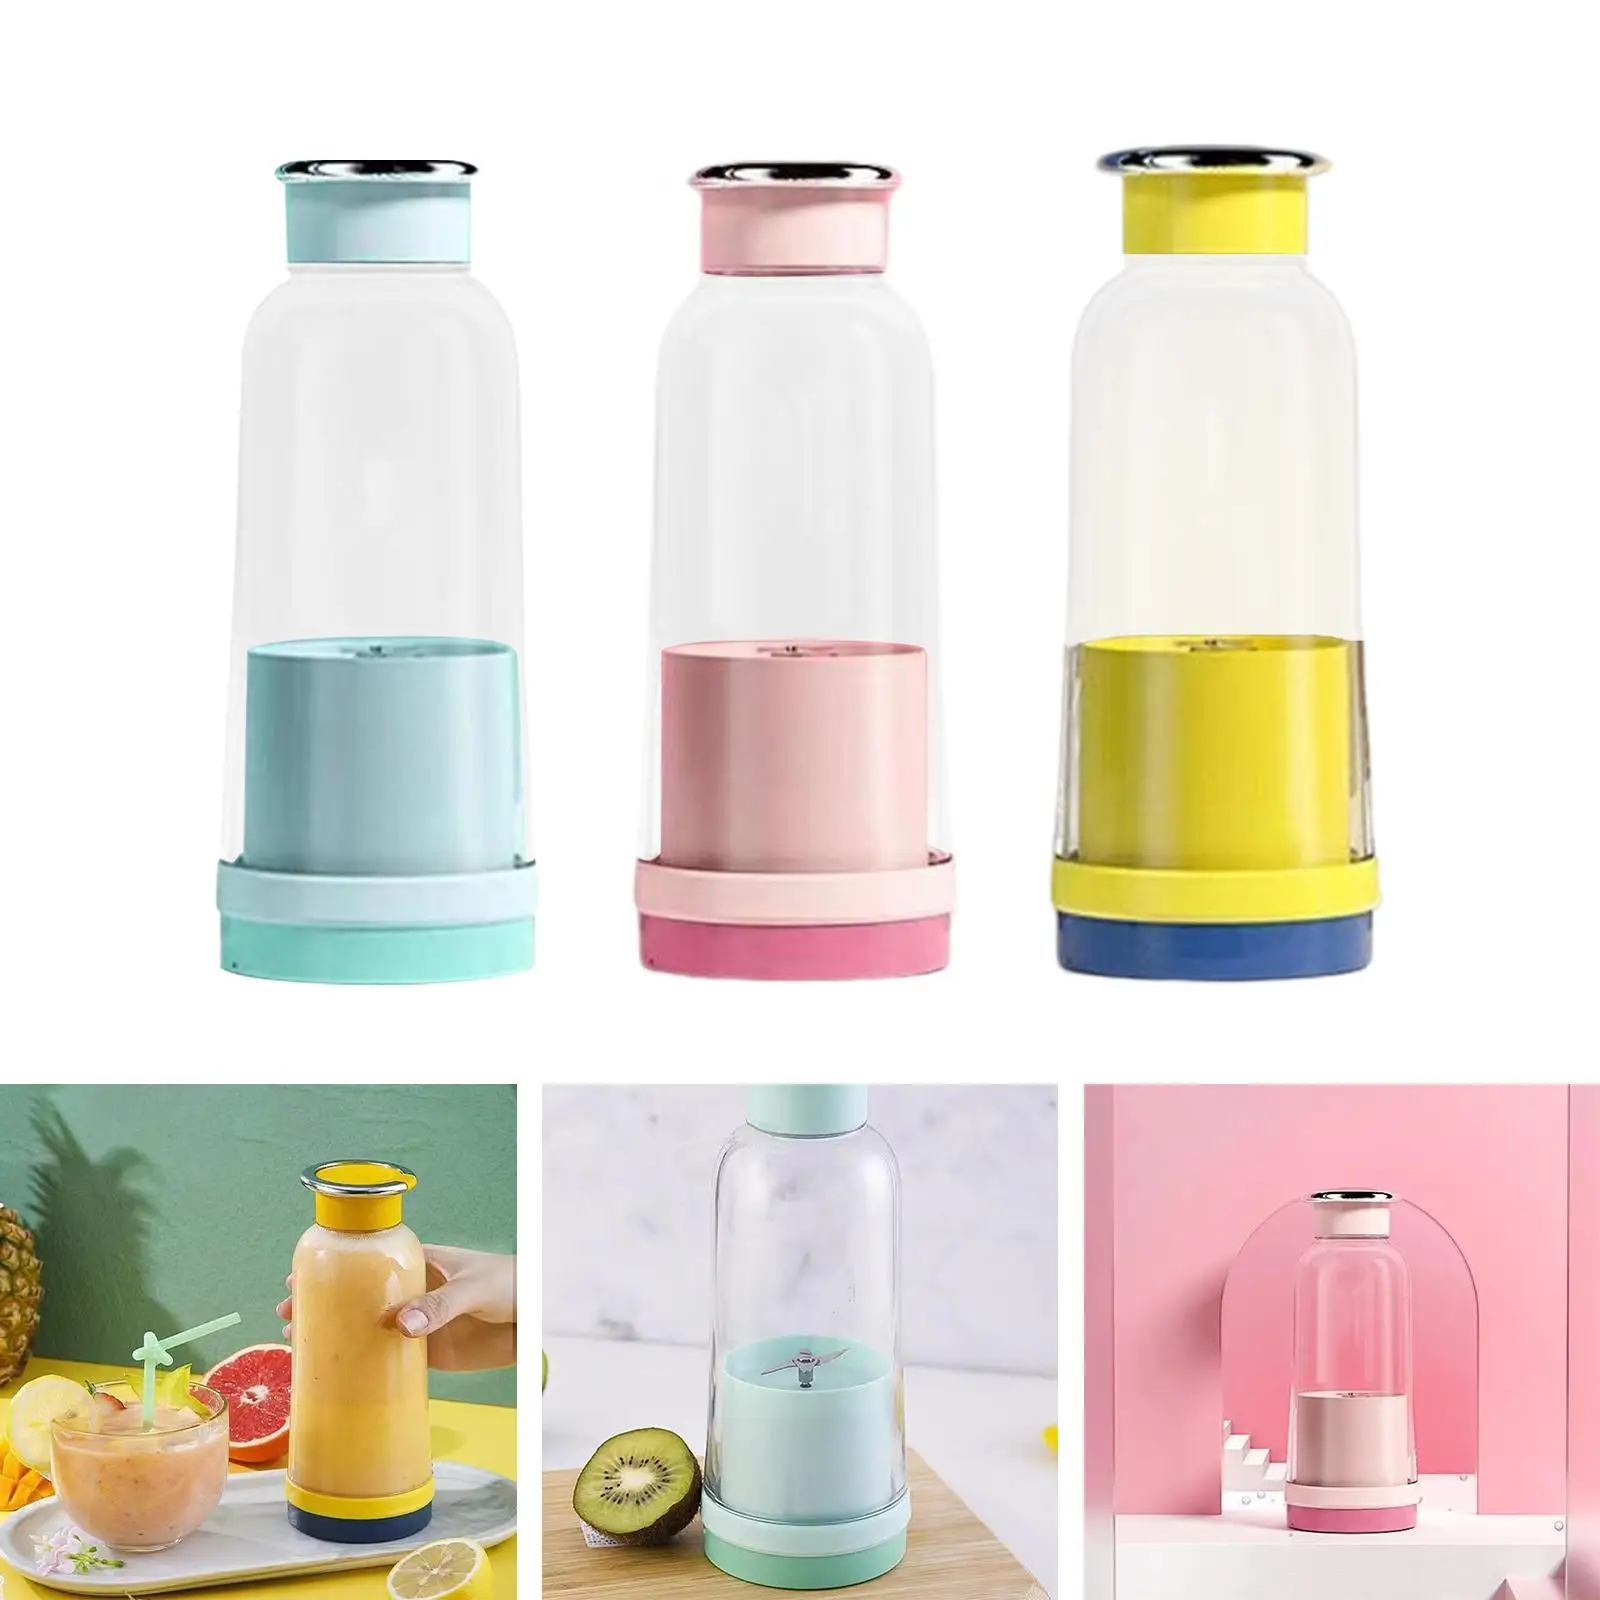 Handheld Juice Cup Personal Juicer Food Fruit Mixer Quick Juicing Shaker Blender Smoothie for Travel Home Household Gym Camping